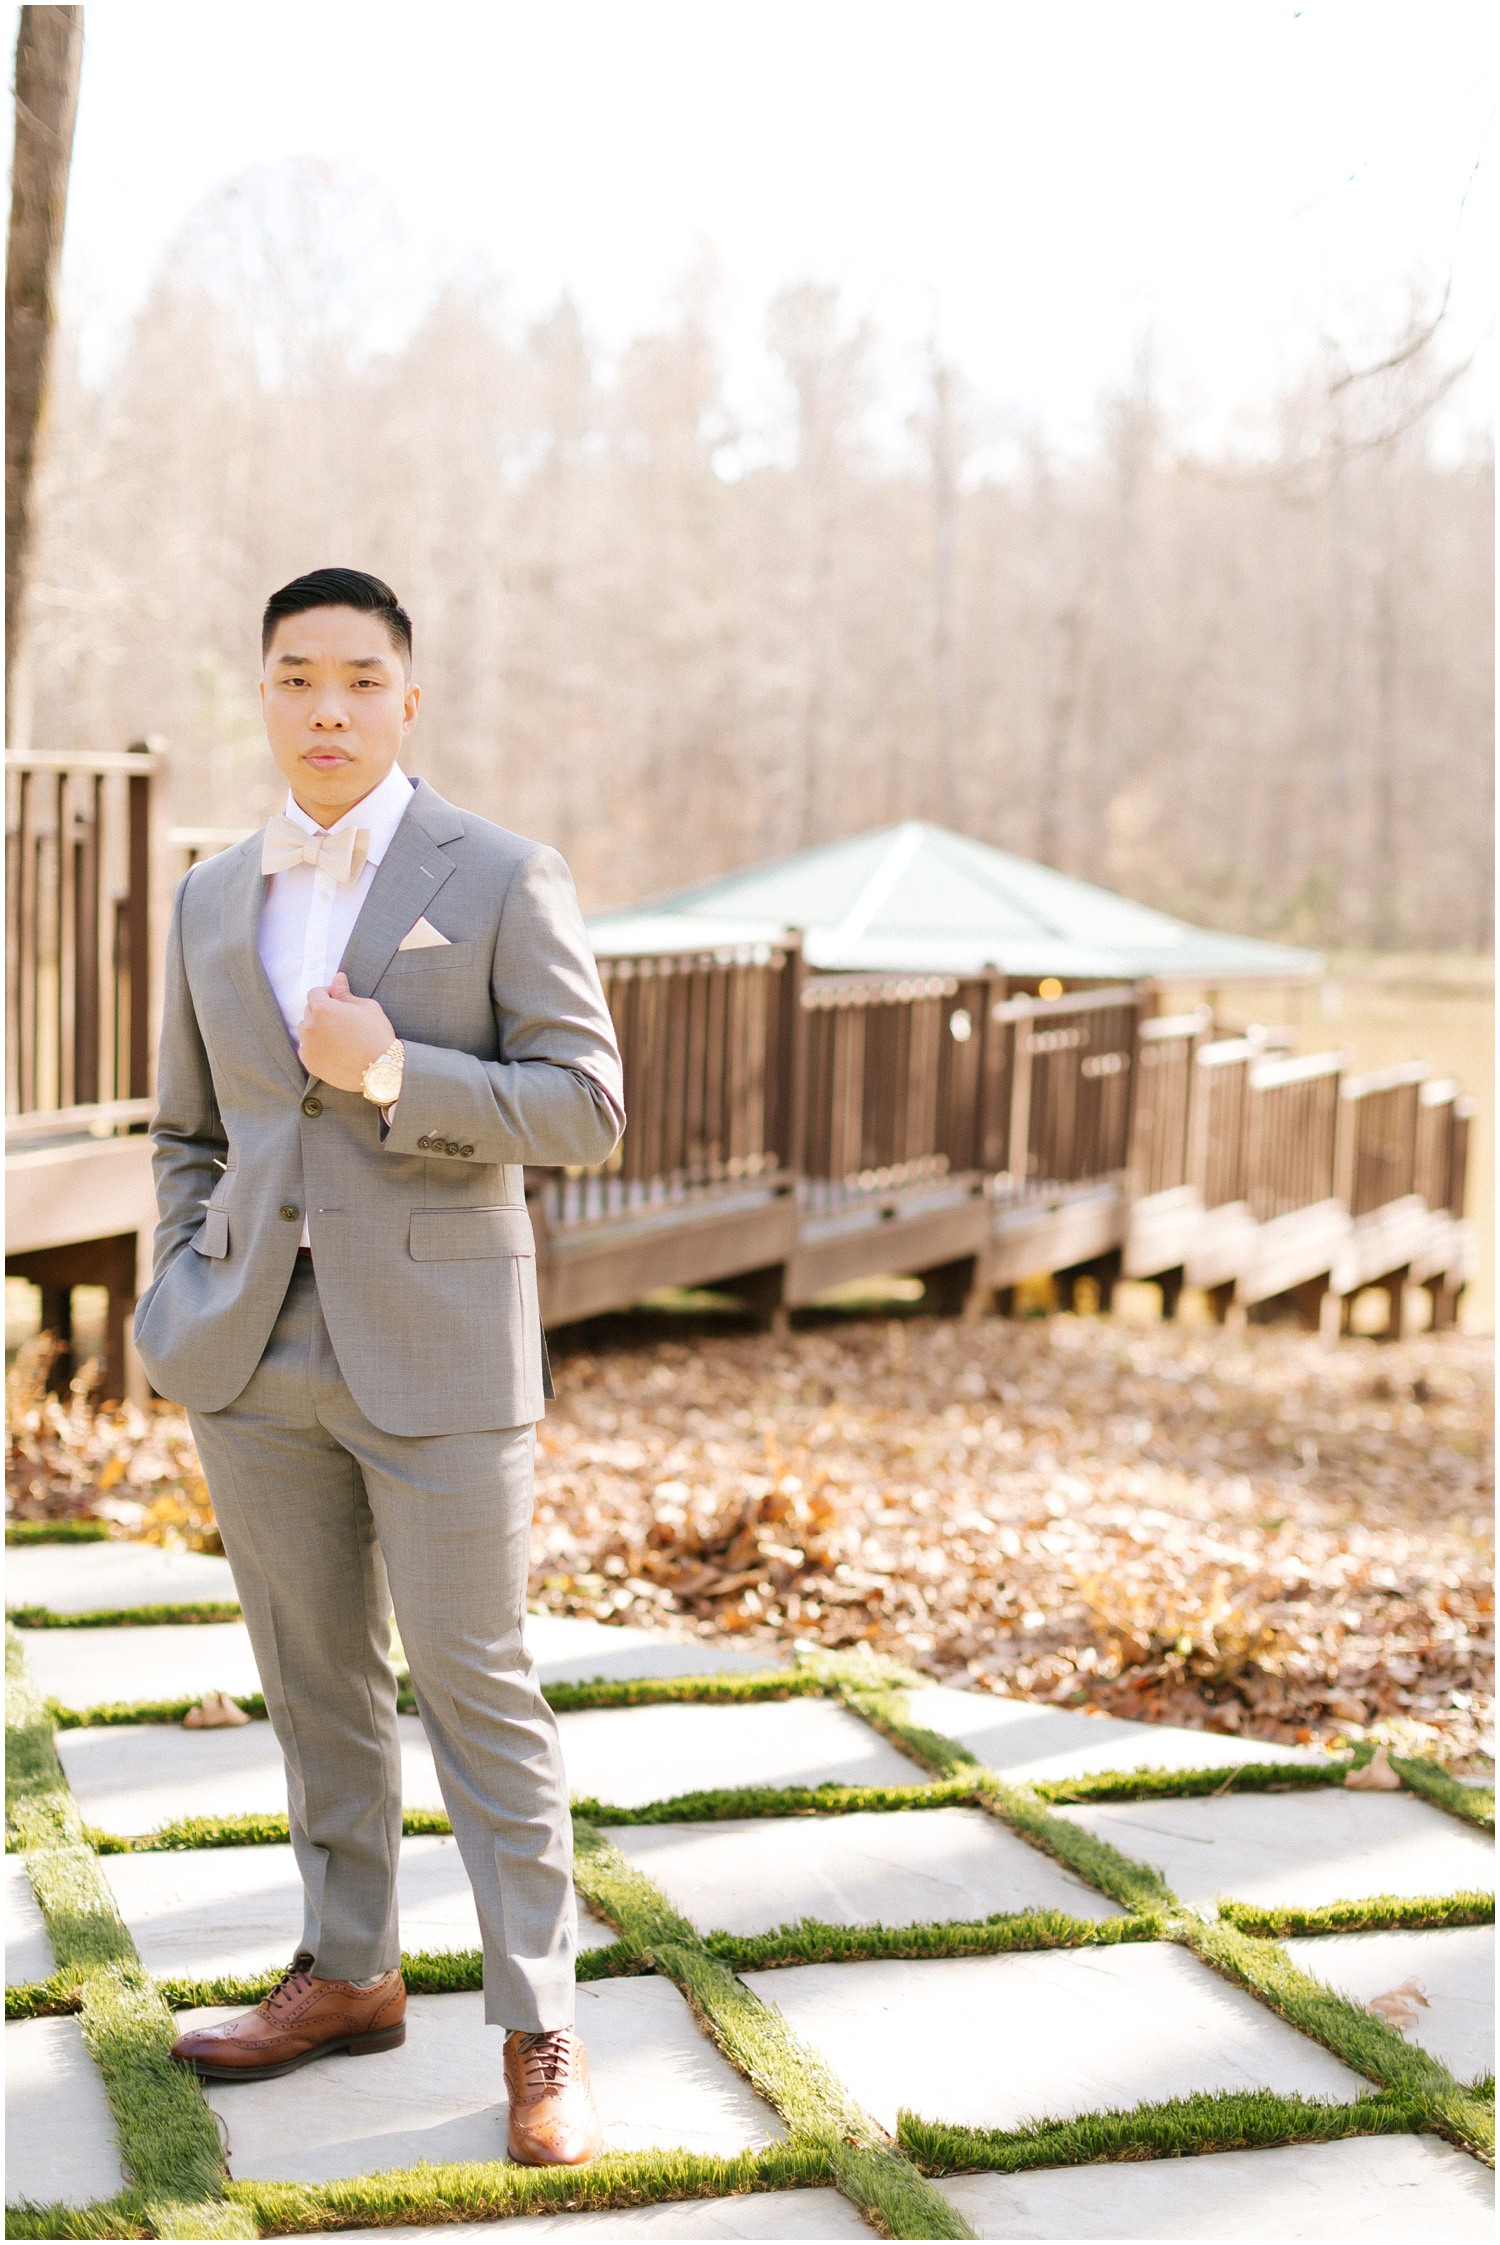 Portrait of the groom on his wedding day at The Barn at Valhalla in Raleigh, NC